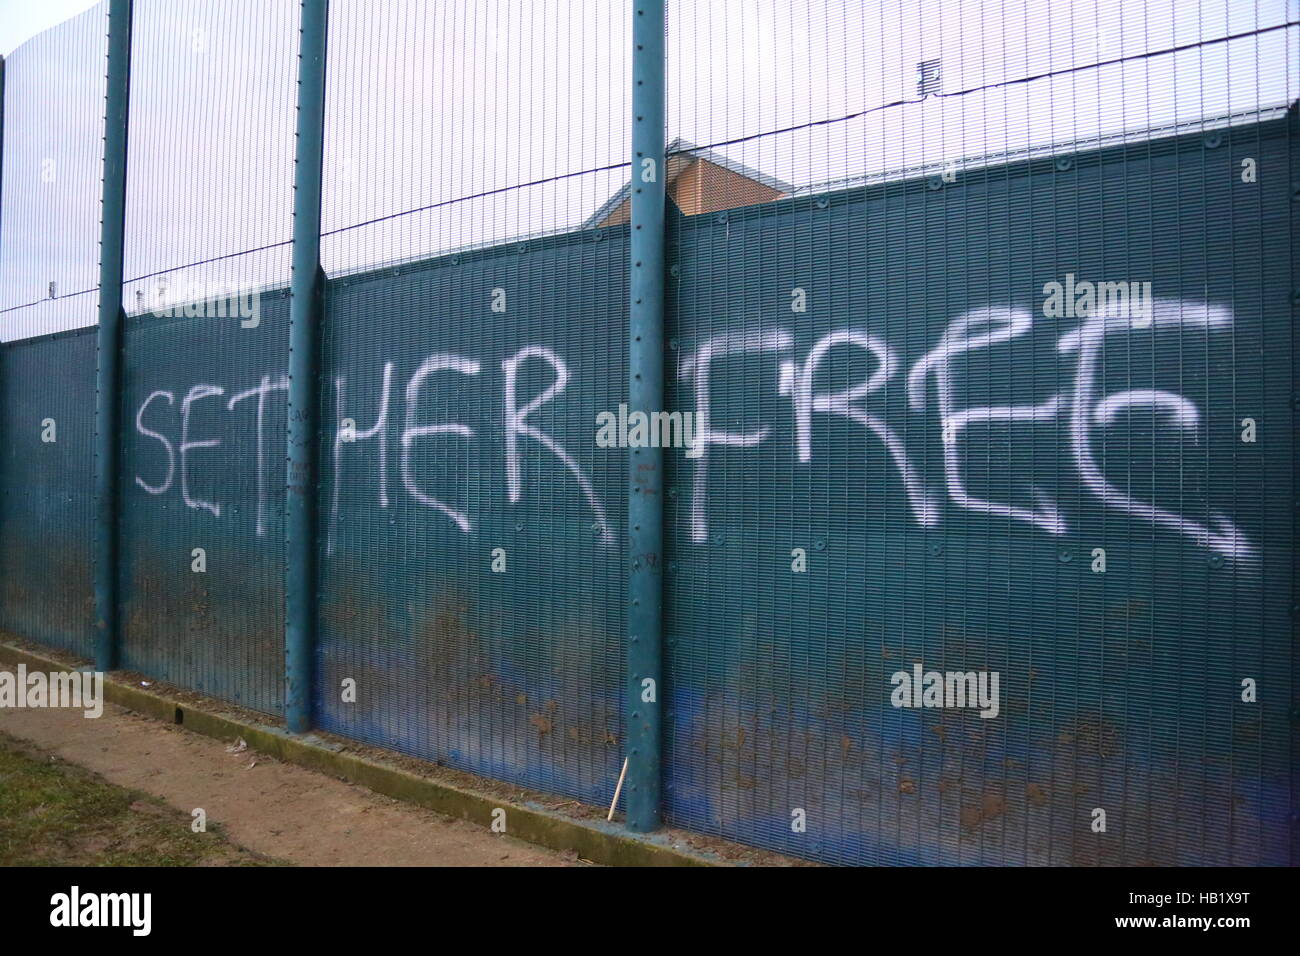 Yarls Wood Detention Centre, Bedford, UK. 3rd December, 2016. Graffiti sprayed on the fence. Nearly 2000 demonstrators protest at the fence of the centre, calling for Yarls Wood Detention Centre to be closed down. Penelope Barritt/Alamy Live News Stock Photo